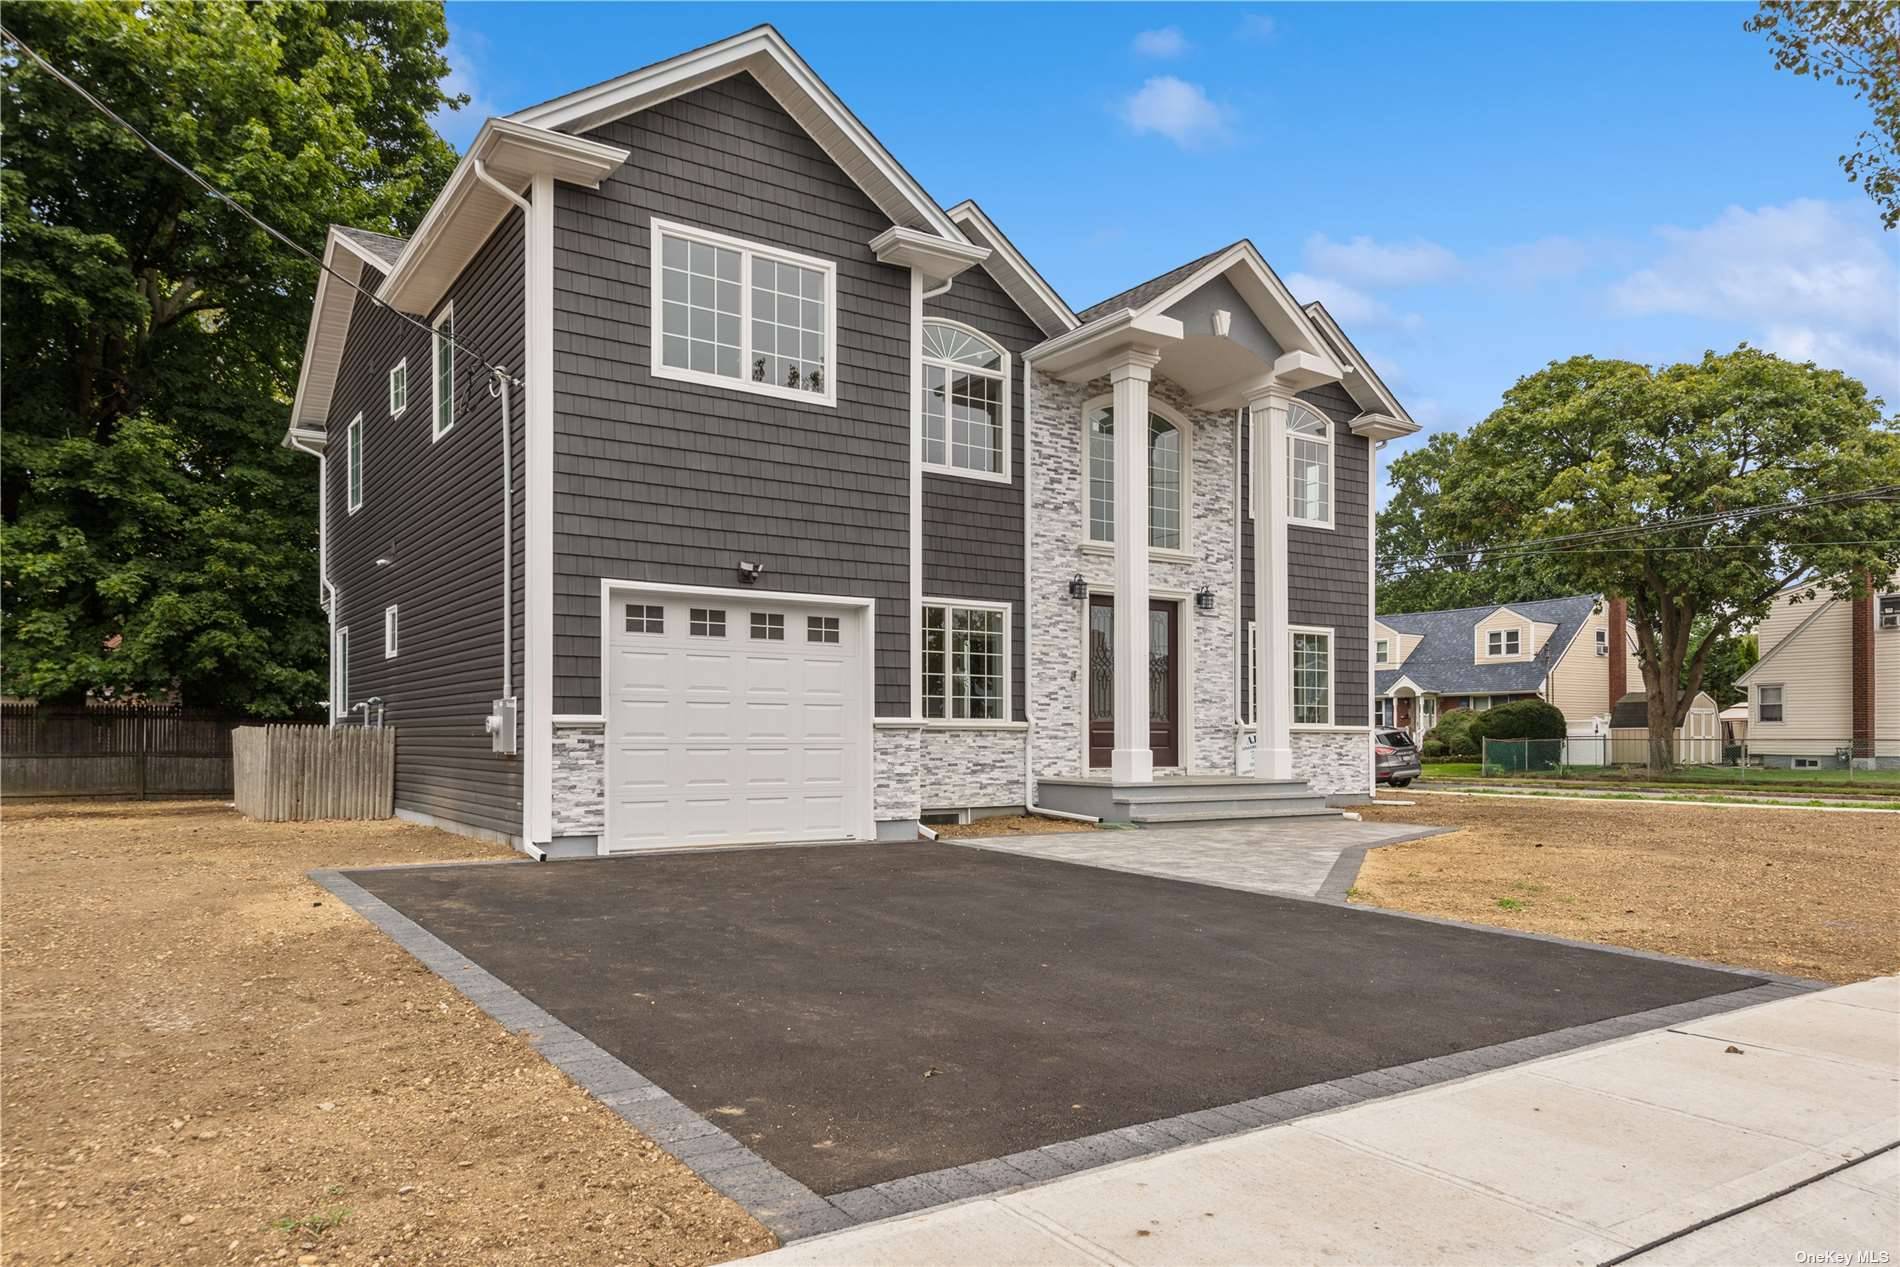 Discover this Hicksville gem boasting a one car garage and a harmonious first floor layout a living room, dining area, family room, kitchen, and half bathroom.